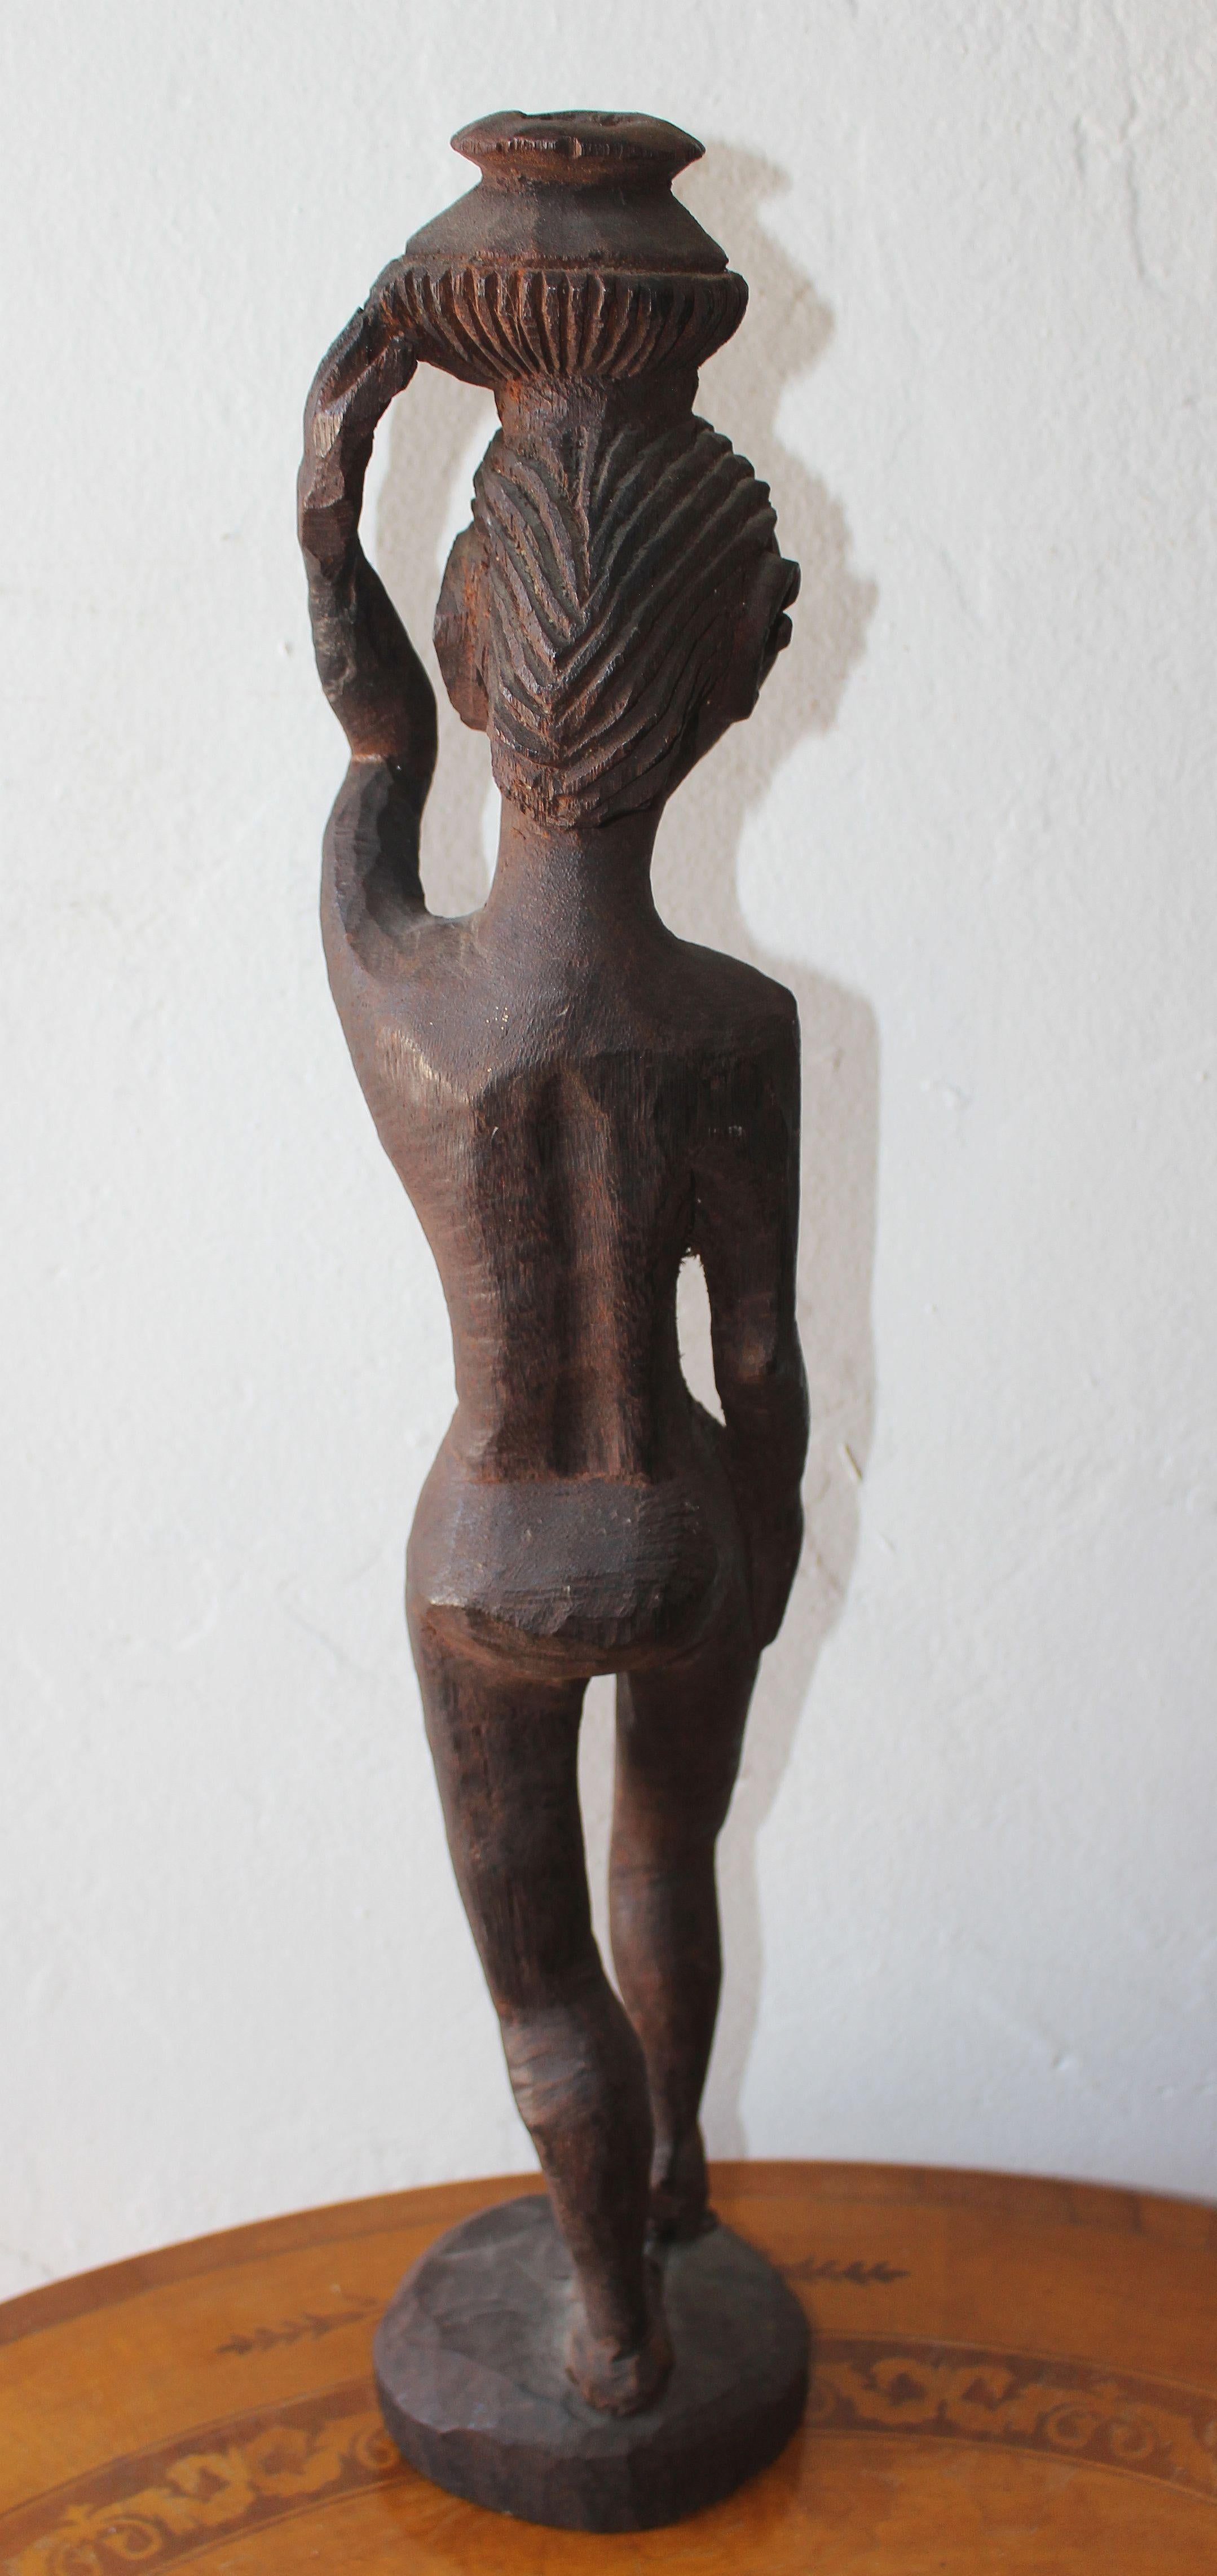 1960s student wood carved sculpture from the Scuola di Belle Arti in Venice.